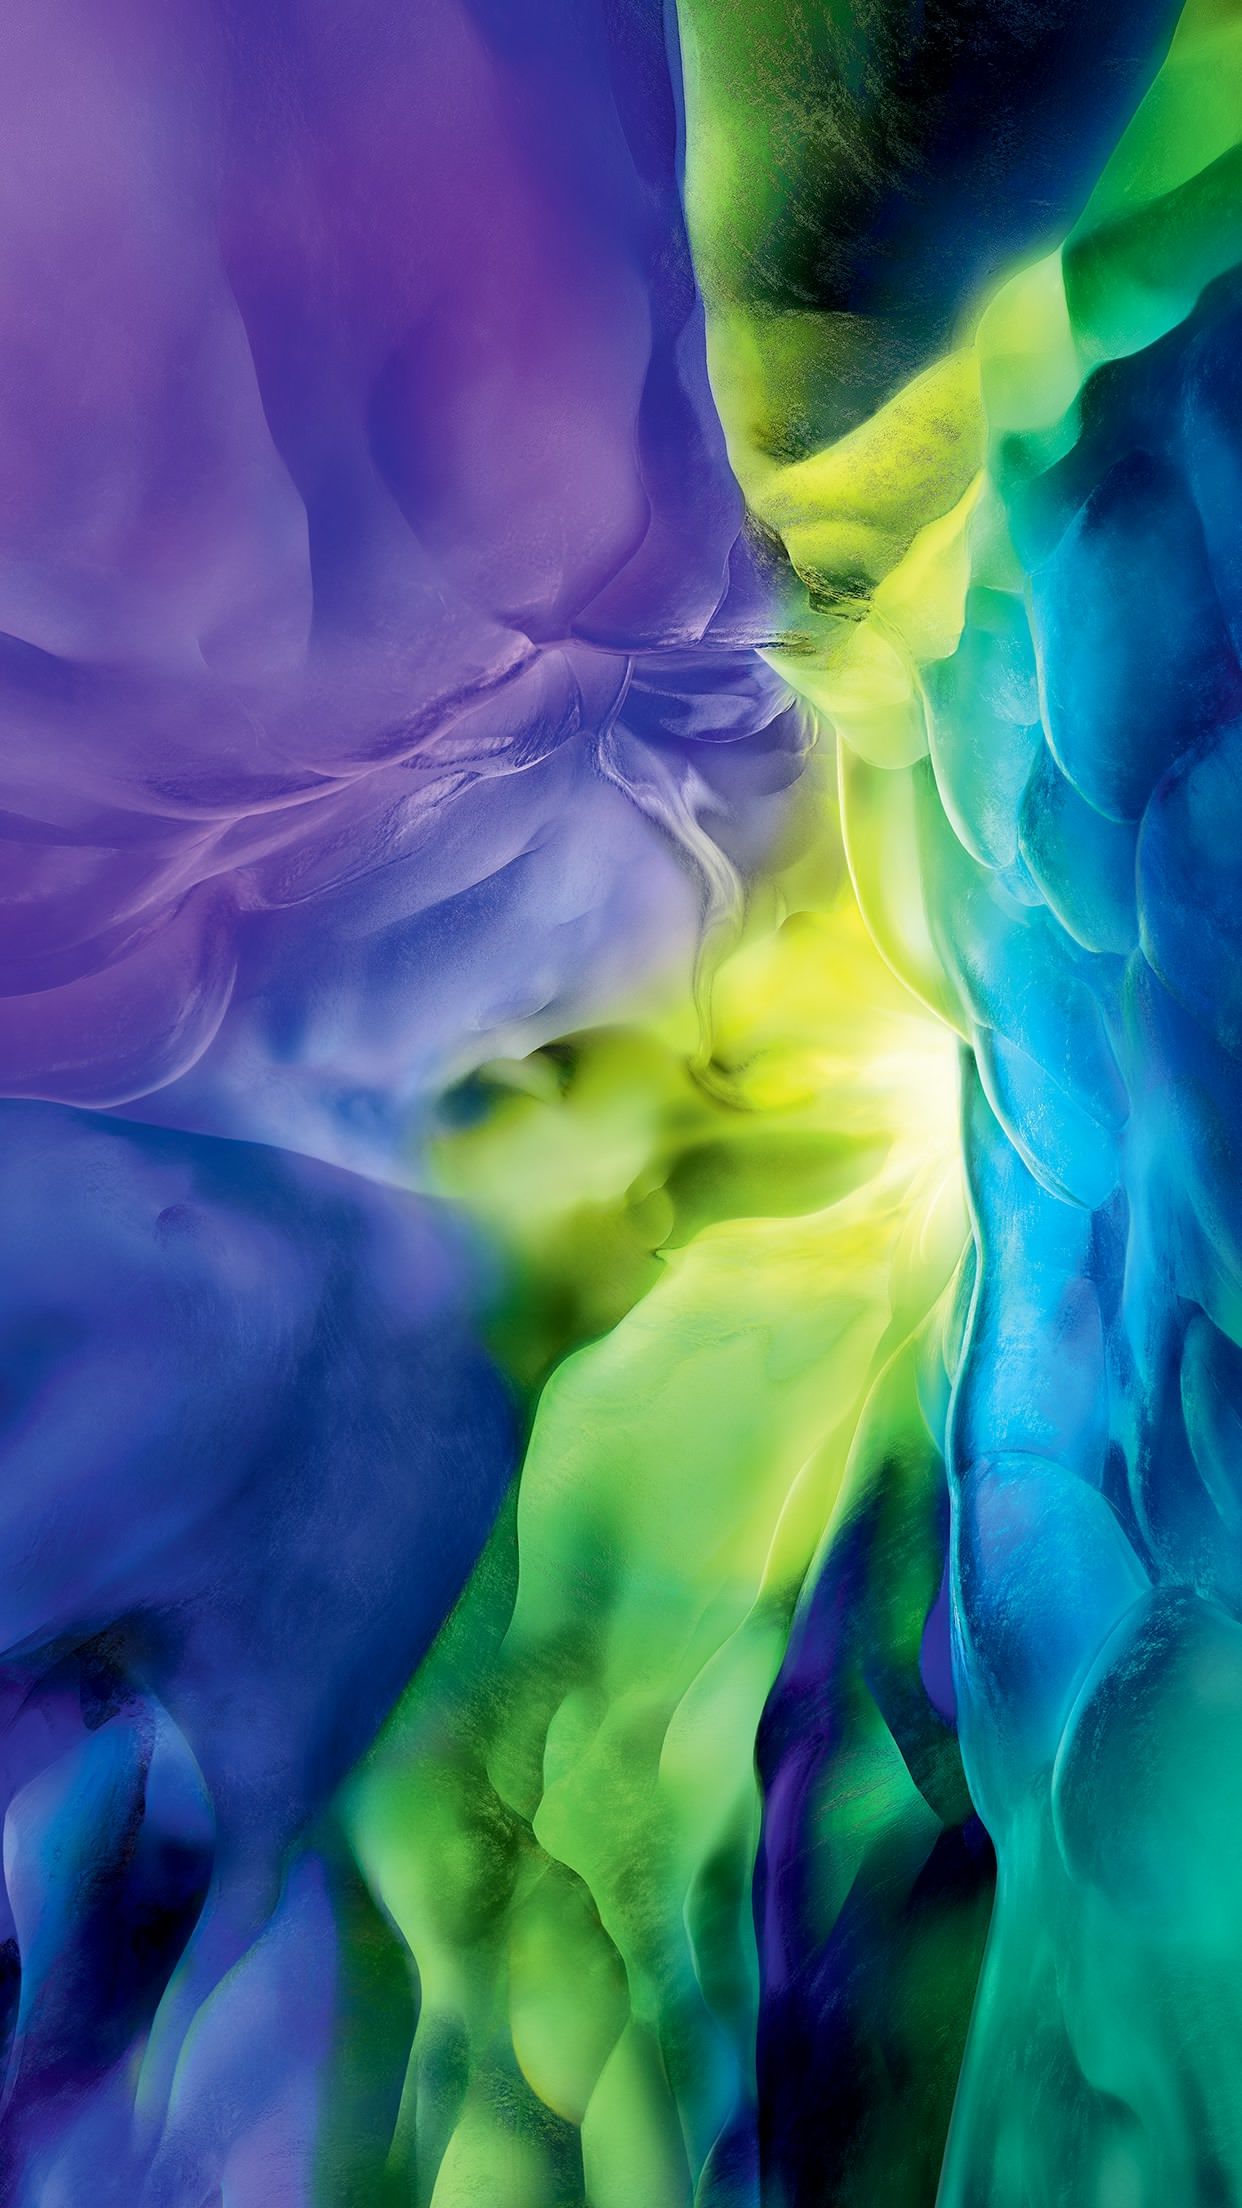 Download The New 2020 iPad Pro Wallpapers for Your Devices Right Here